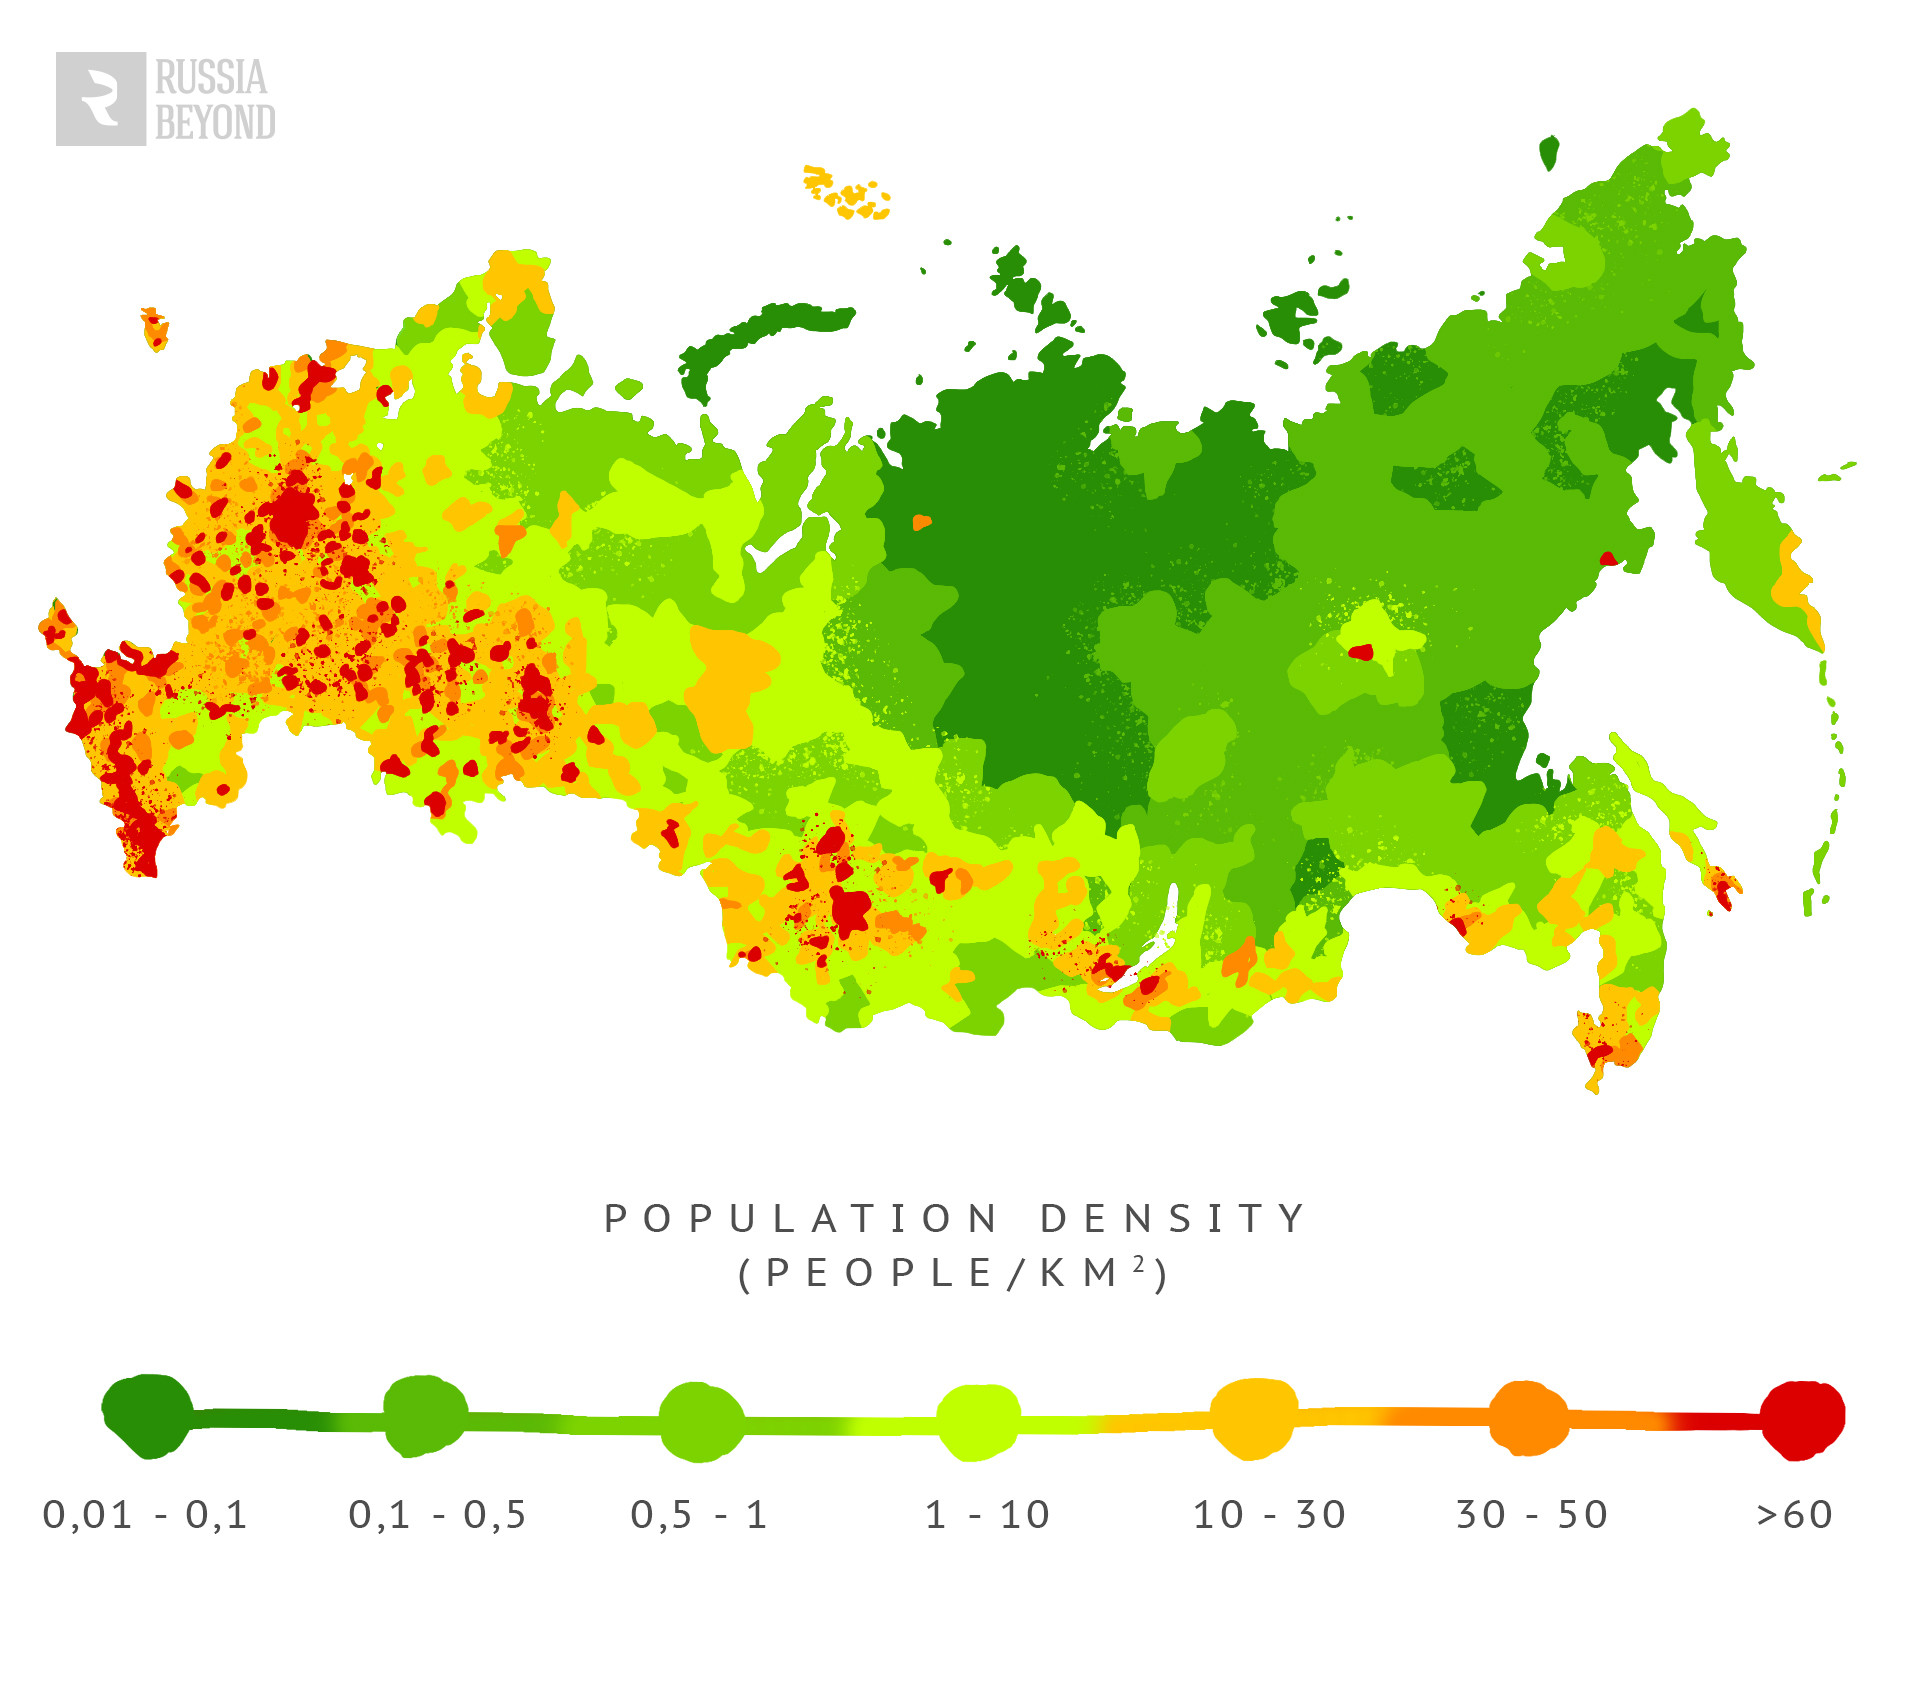 Why is Russia so sparsely populated? Russia Beyond